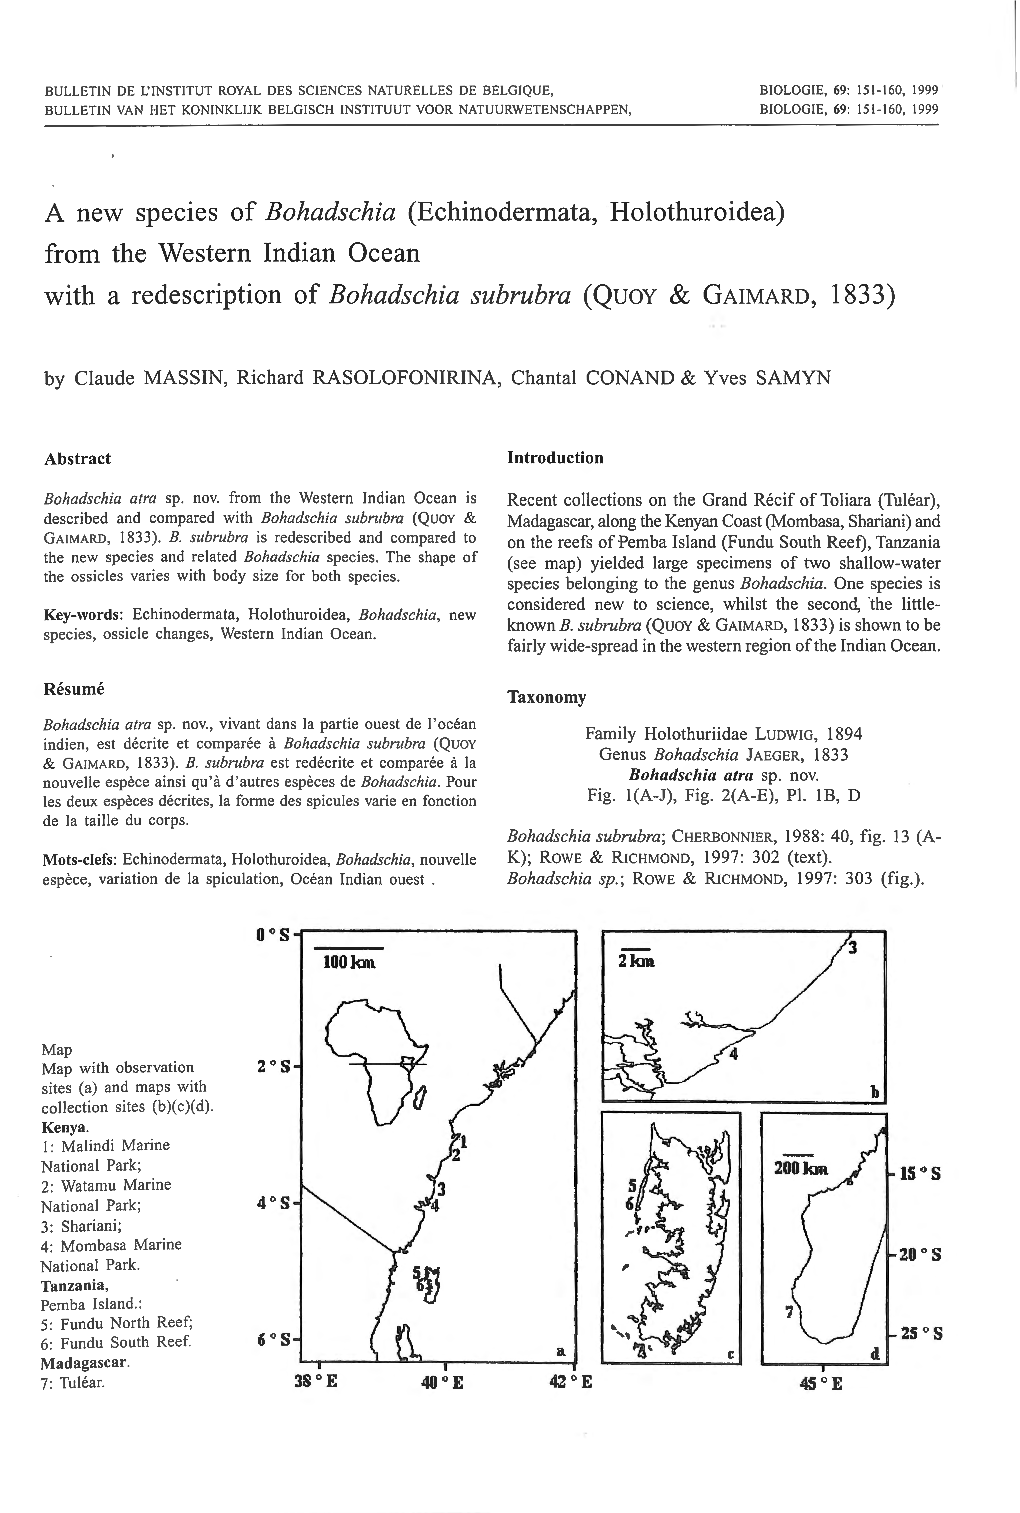 A New Species of Bohadschia (Echinodermata, Holothuroidea) from the Western Indian Ocean with a Redescription of Bohadschia Subrubra (Quoy & GAIMARD, 1833)